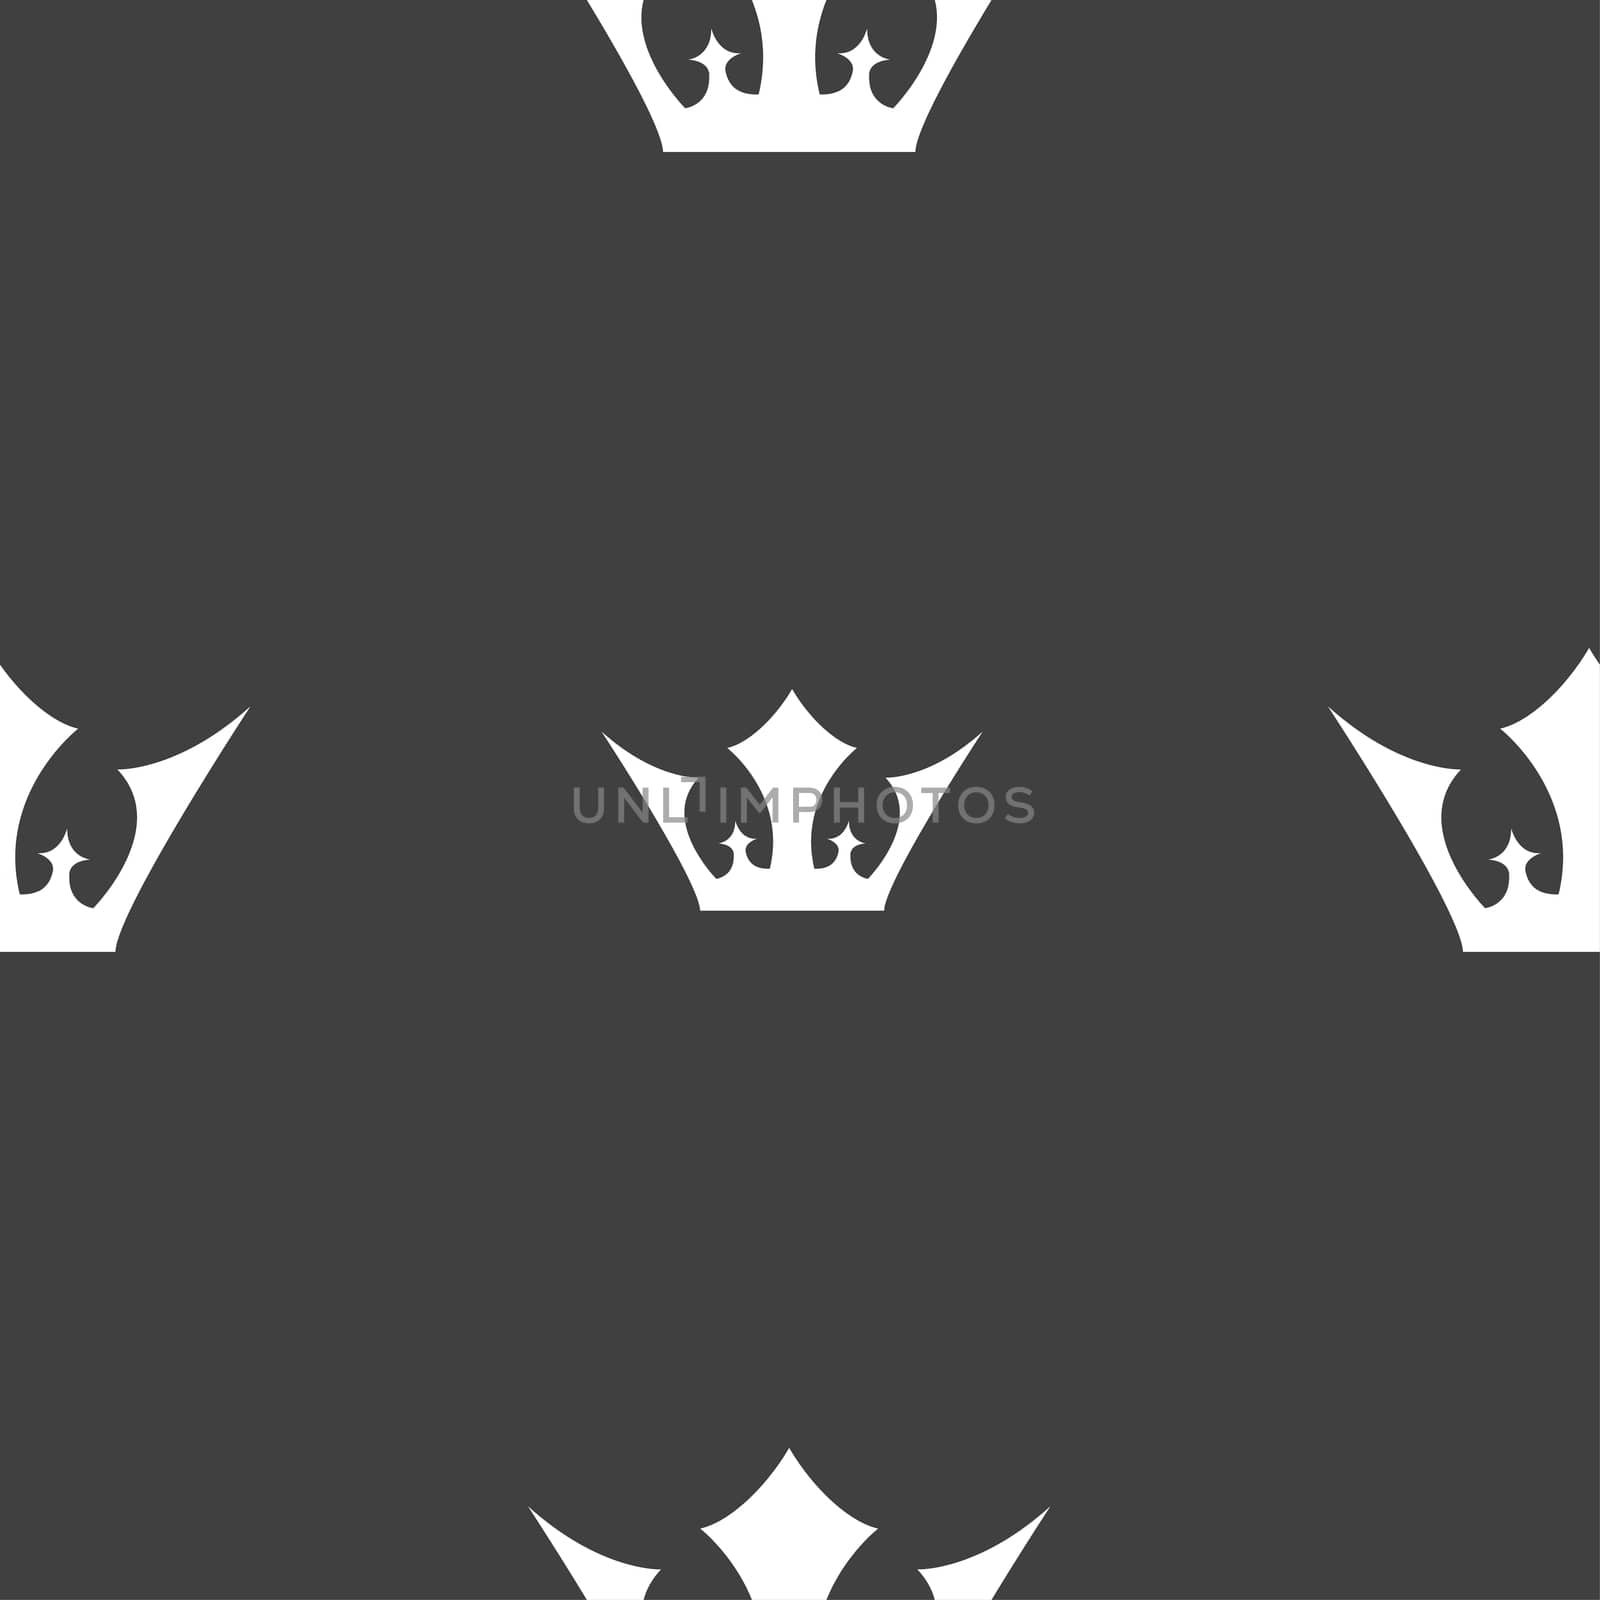 Crown icon sign. Seamless pattern on a gray background. illustration